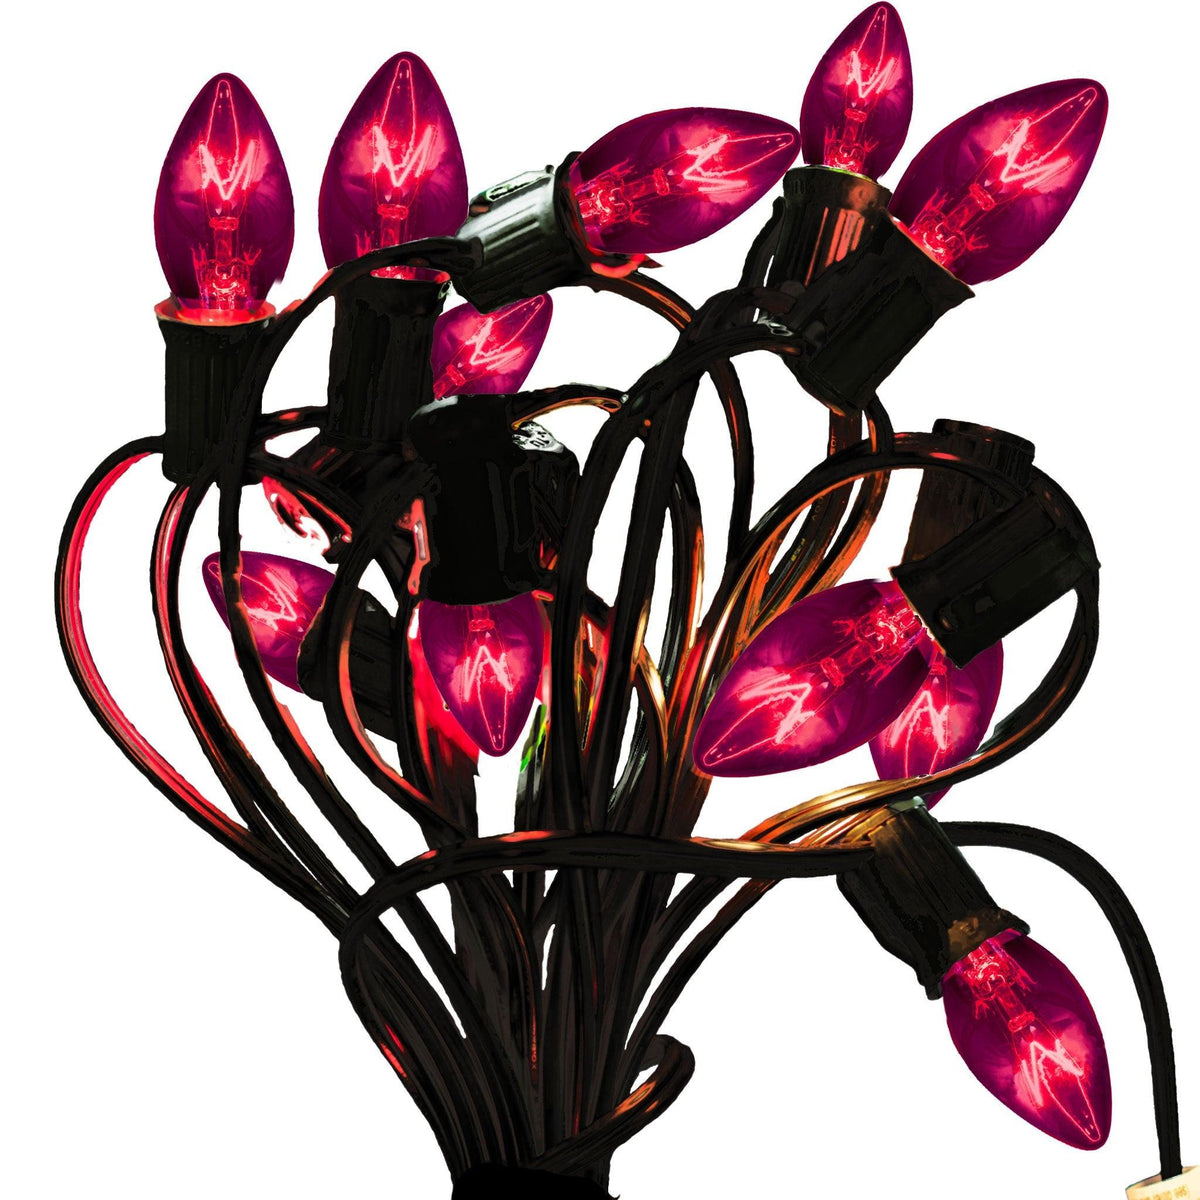 25FT Purple Outdoor String Lighting Set!    Choose between Twinkling Bulbs and Steady Burning Bulbs, White Wire or Green Wire Cords, C7 & C9 Size available.